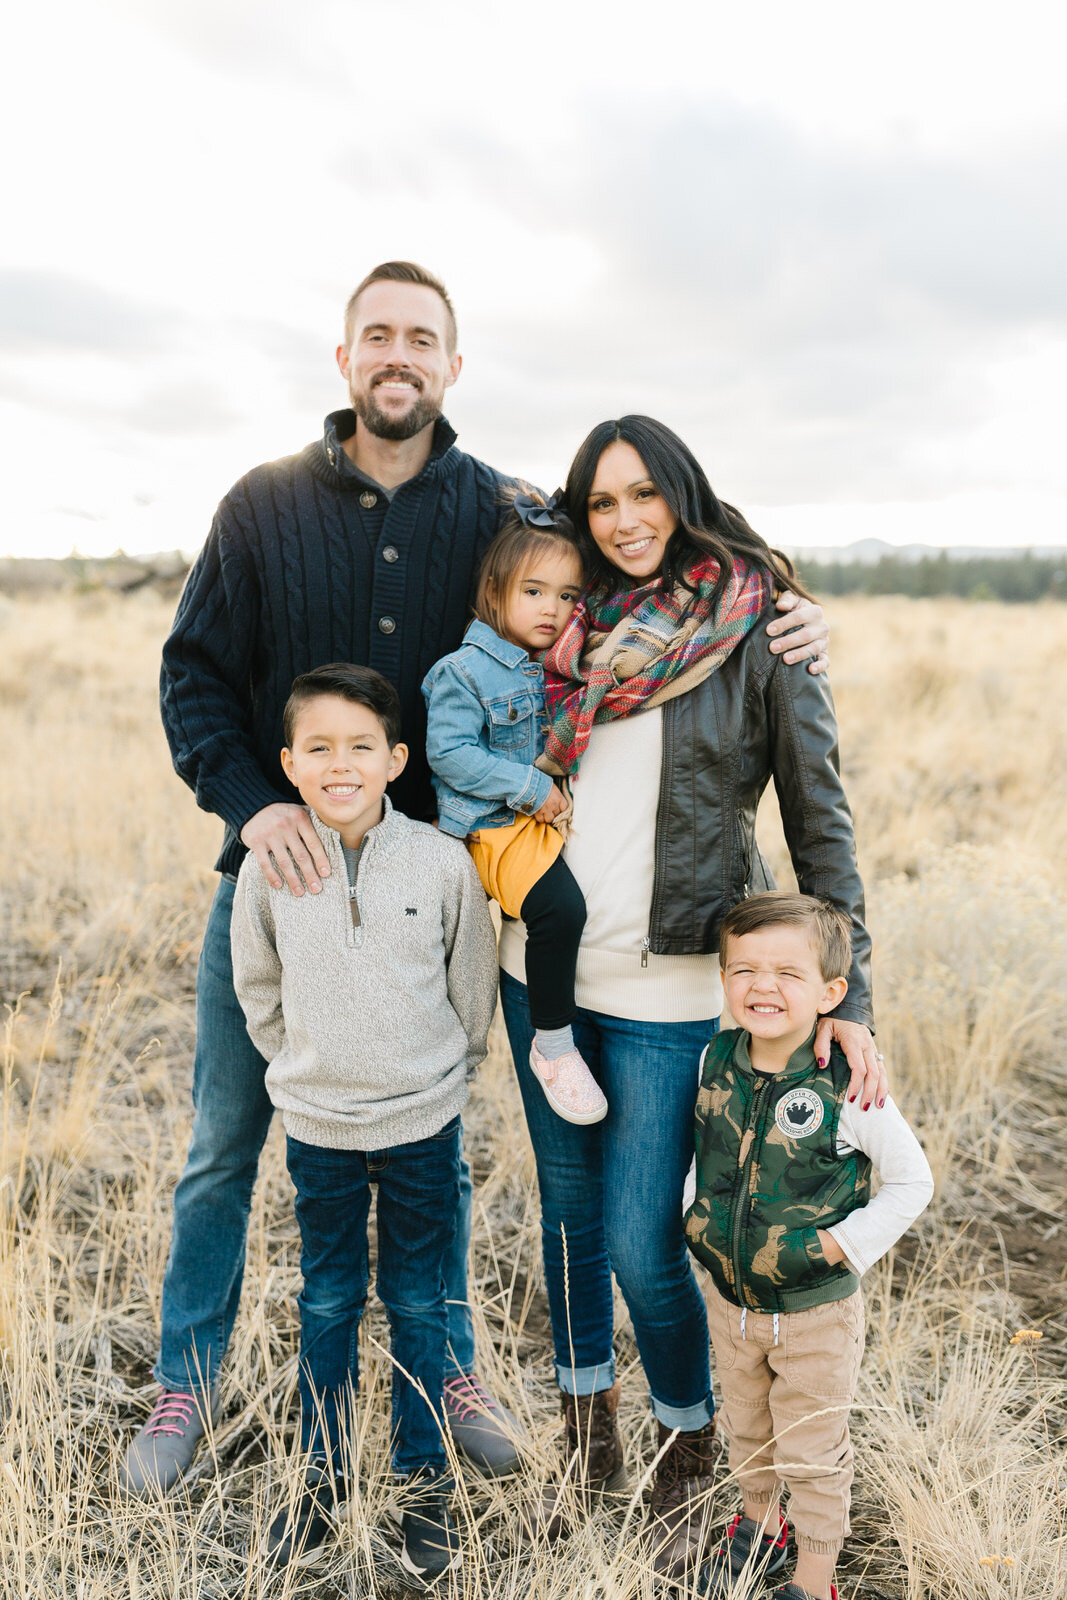 No more family photo frustration! I HAVE A PLAN! Do you need Family Photos?  San Diego Outdoor Photographer – Savoring the Sweet Life Blog